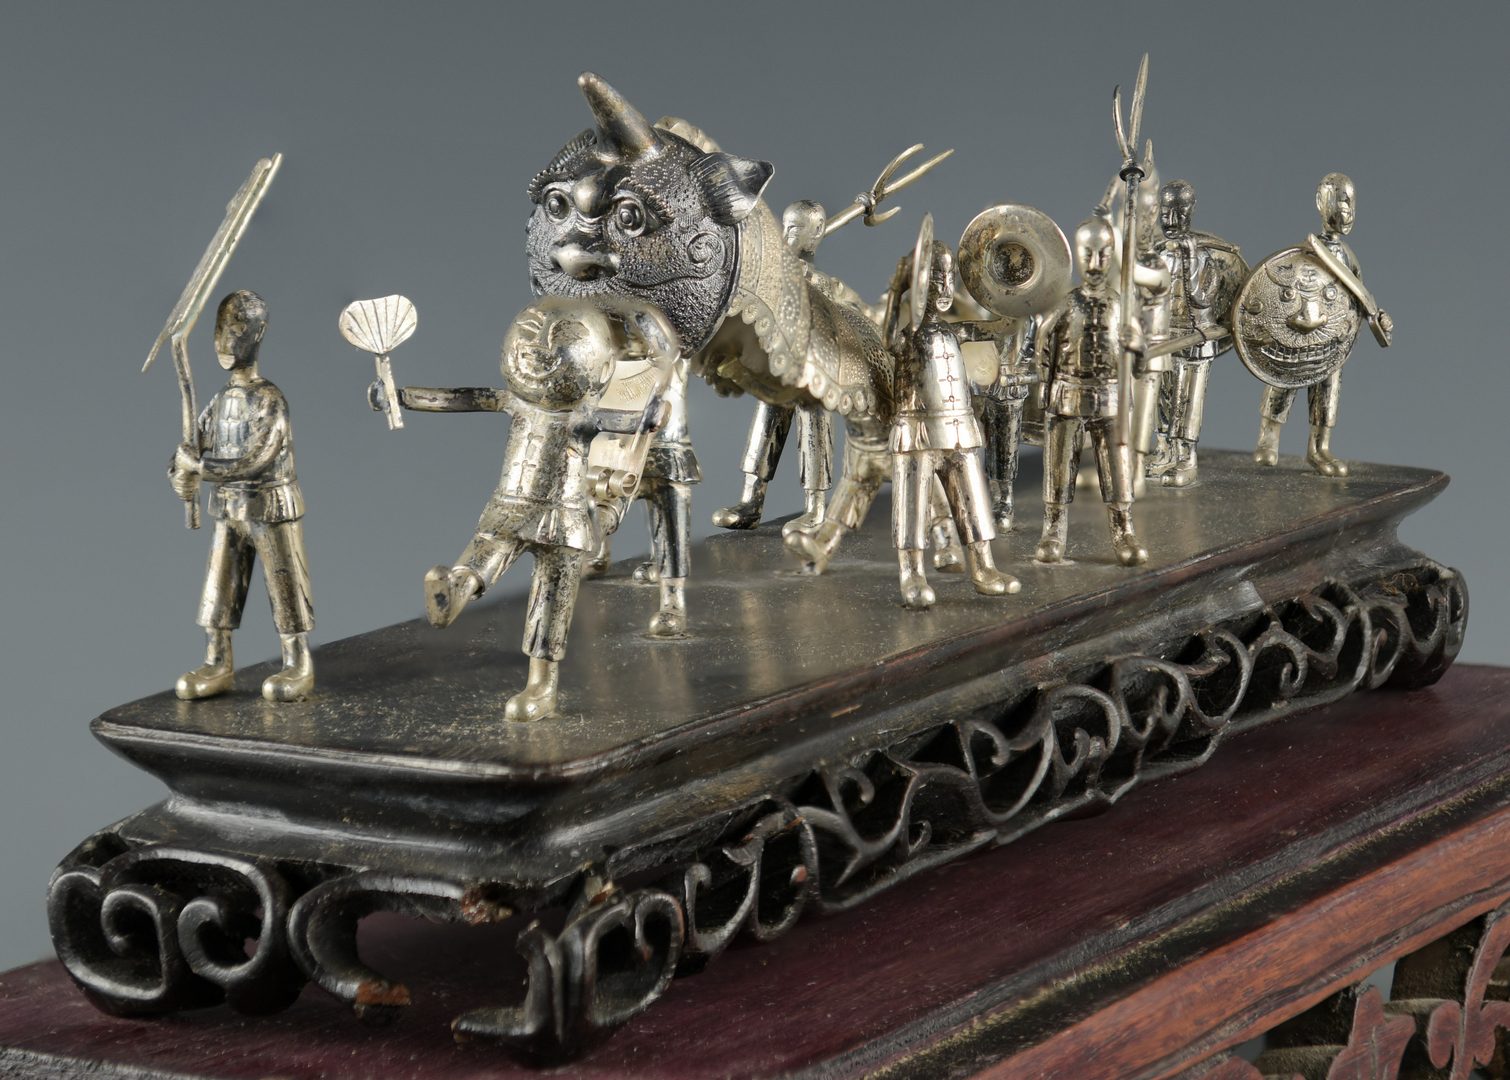 Lot 1: Miniature Chinese Export Silver Procession Scene